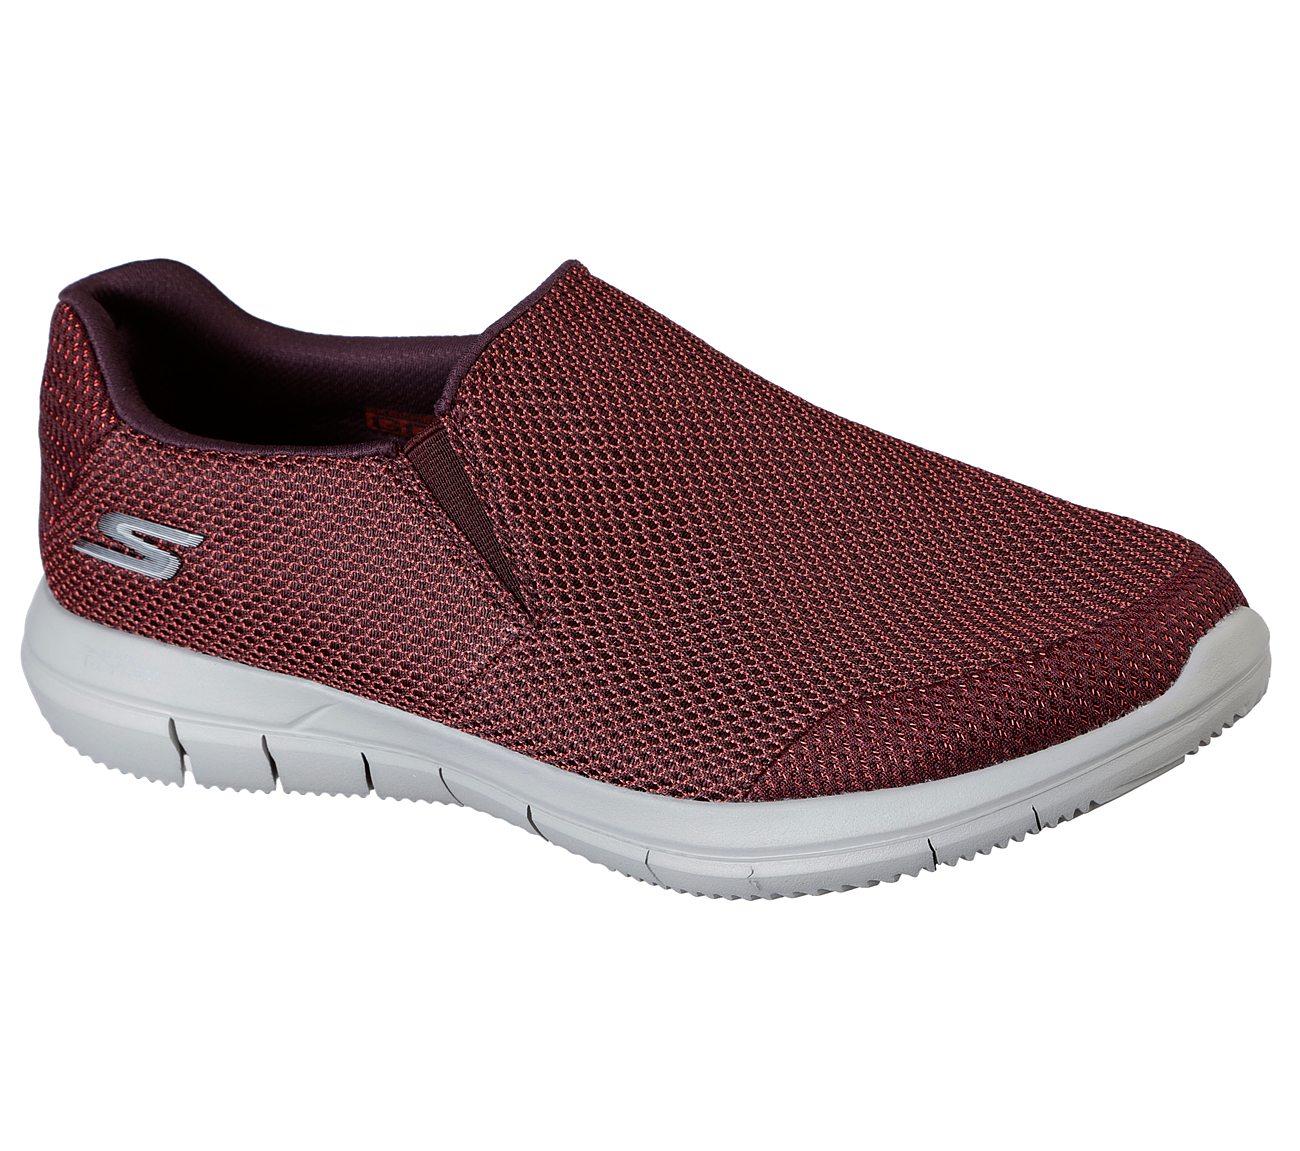 GO FLEX 2 - COMPLETION, BBURGUNDY Footwear Lateral View